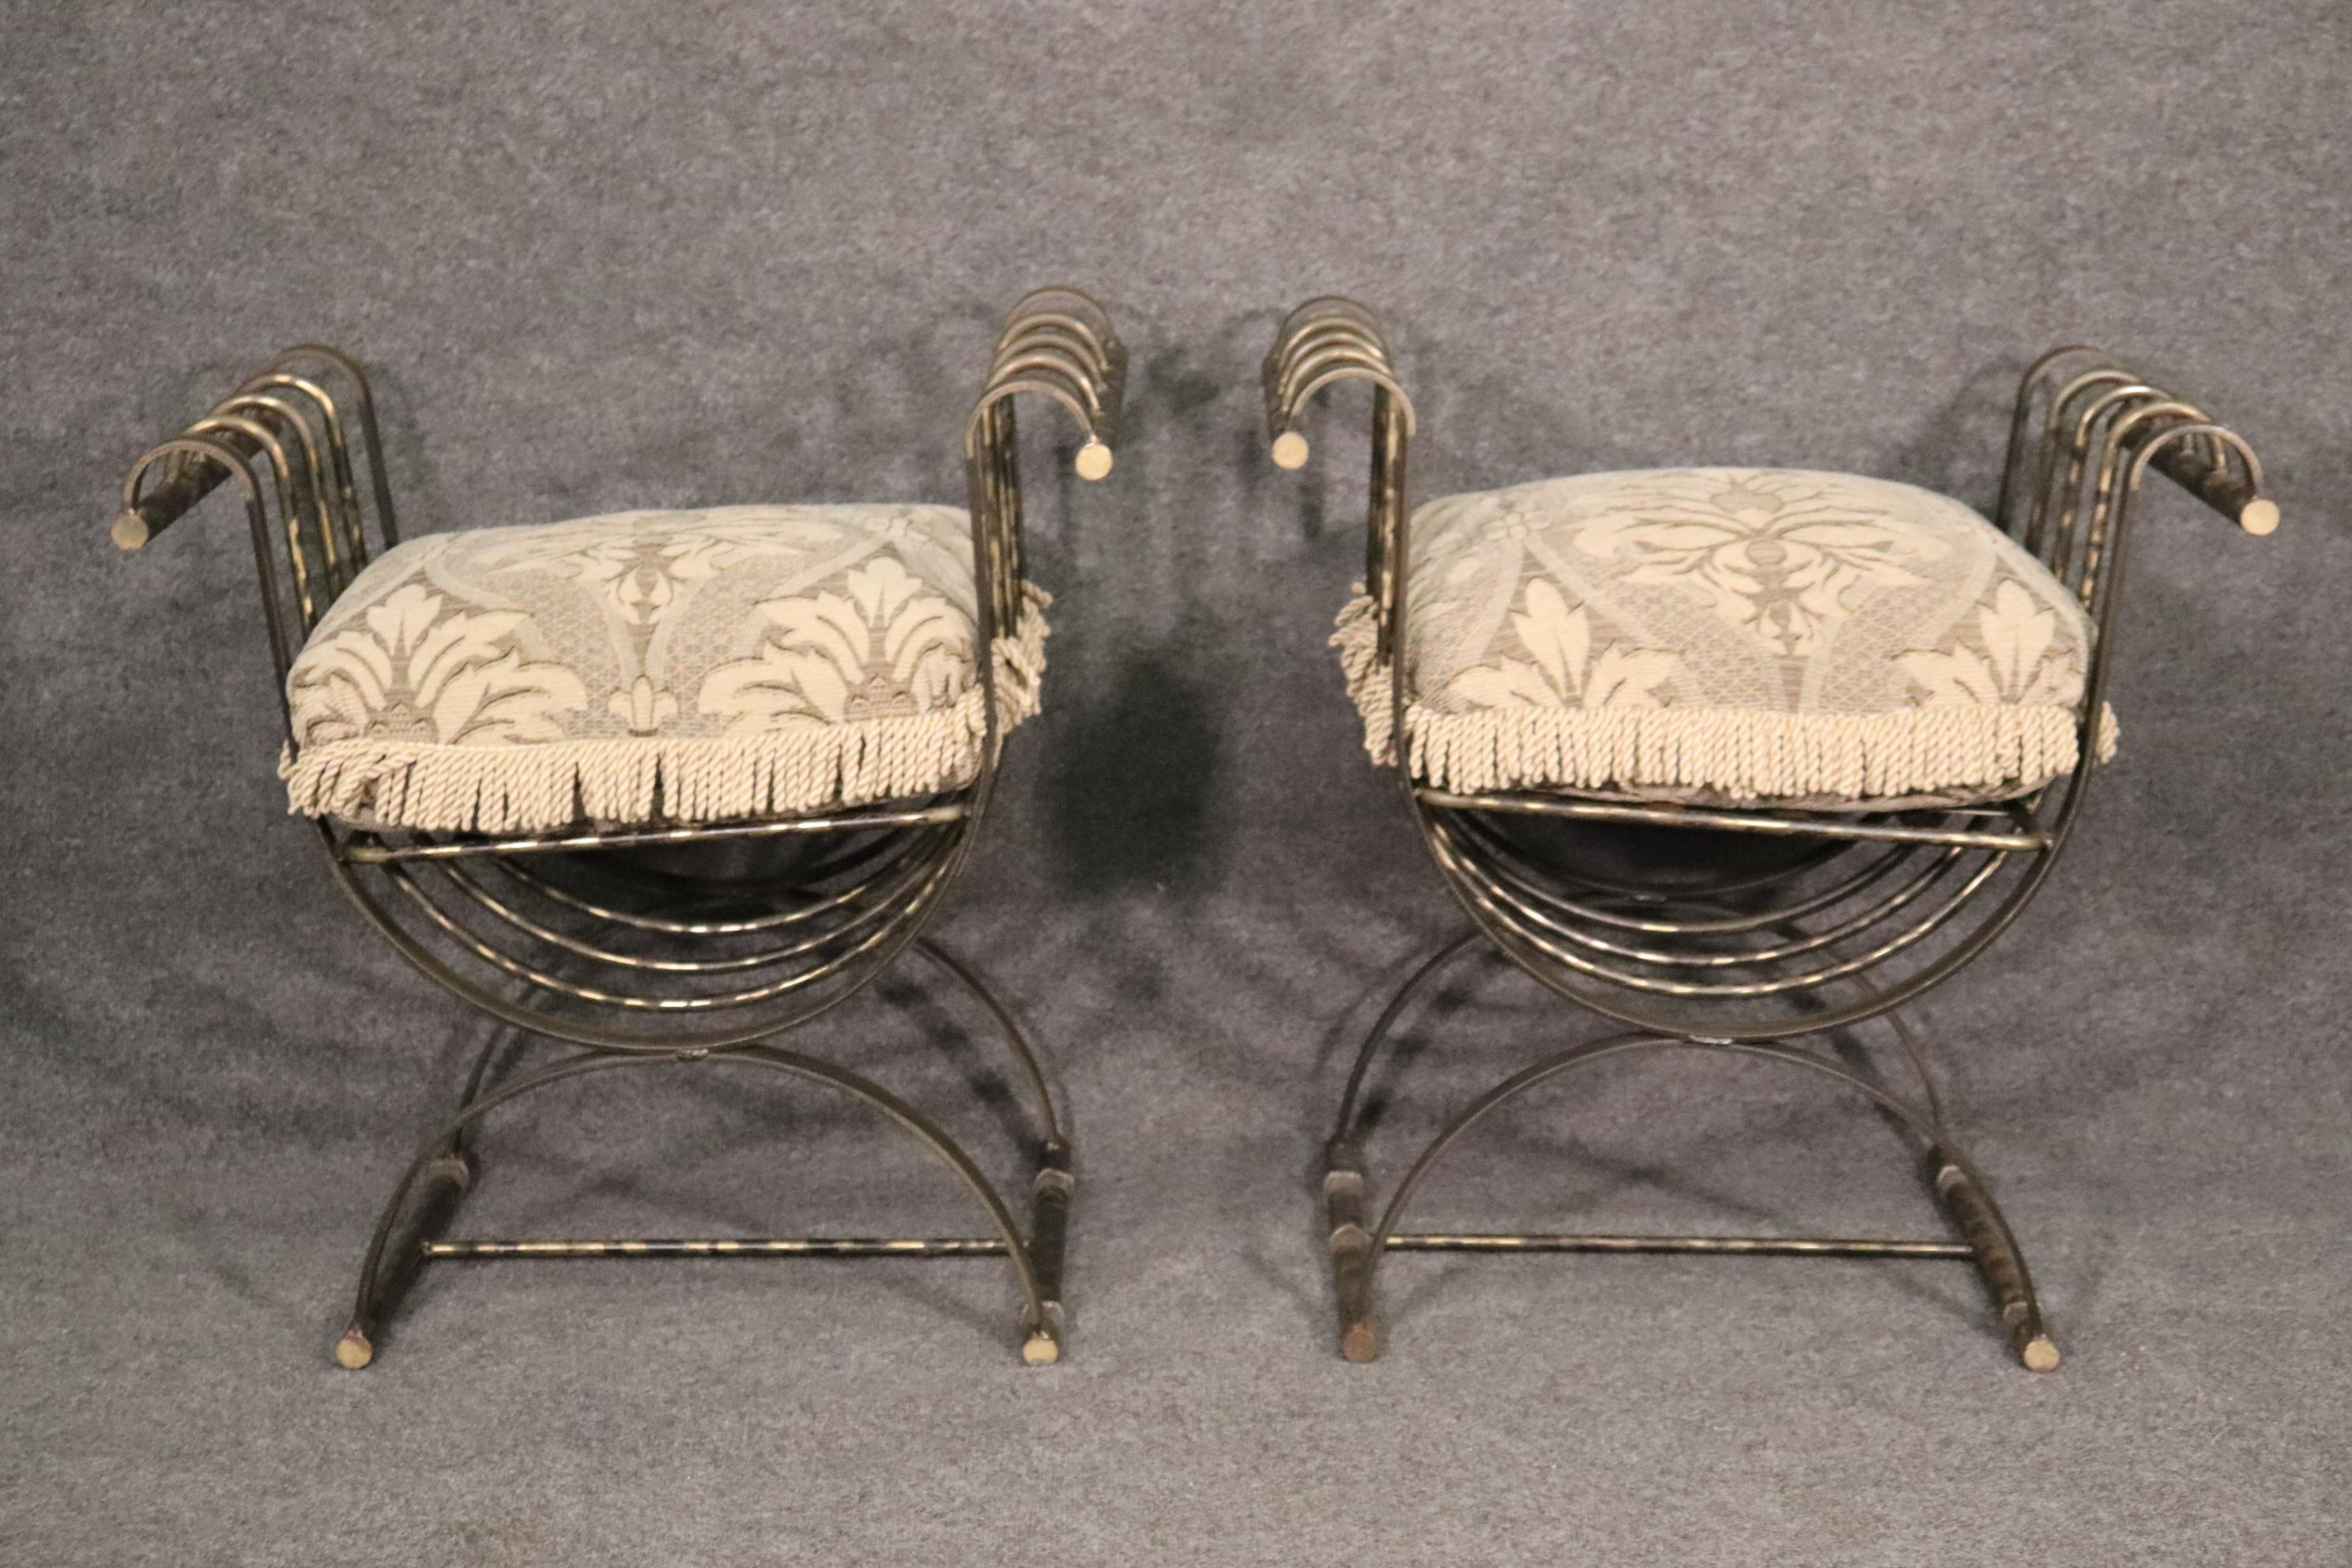 These bronze finished iron chairs are designed in the style of the great savonarolla chairs of Italy and Spain. They are made of wrought iron but have a bronze finish. They are heavy and measure 29 tall x 27 wide x 18 deep and the seat height is 18